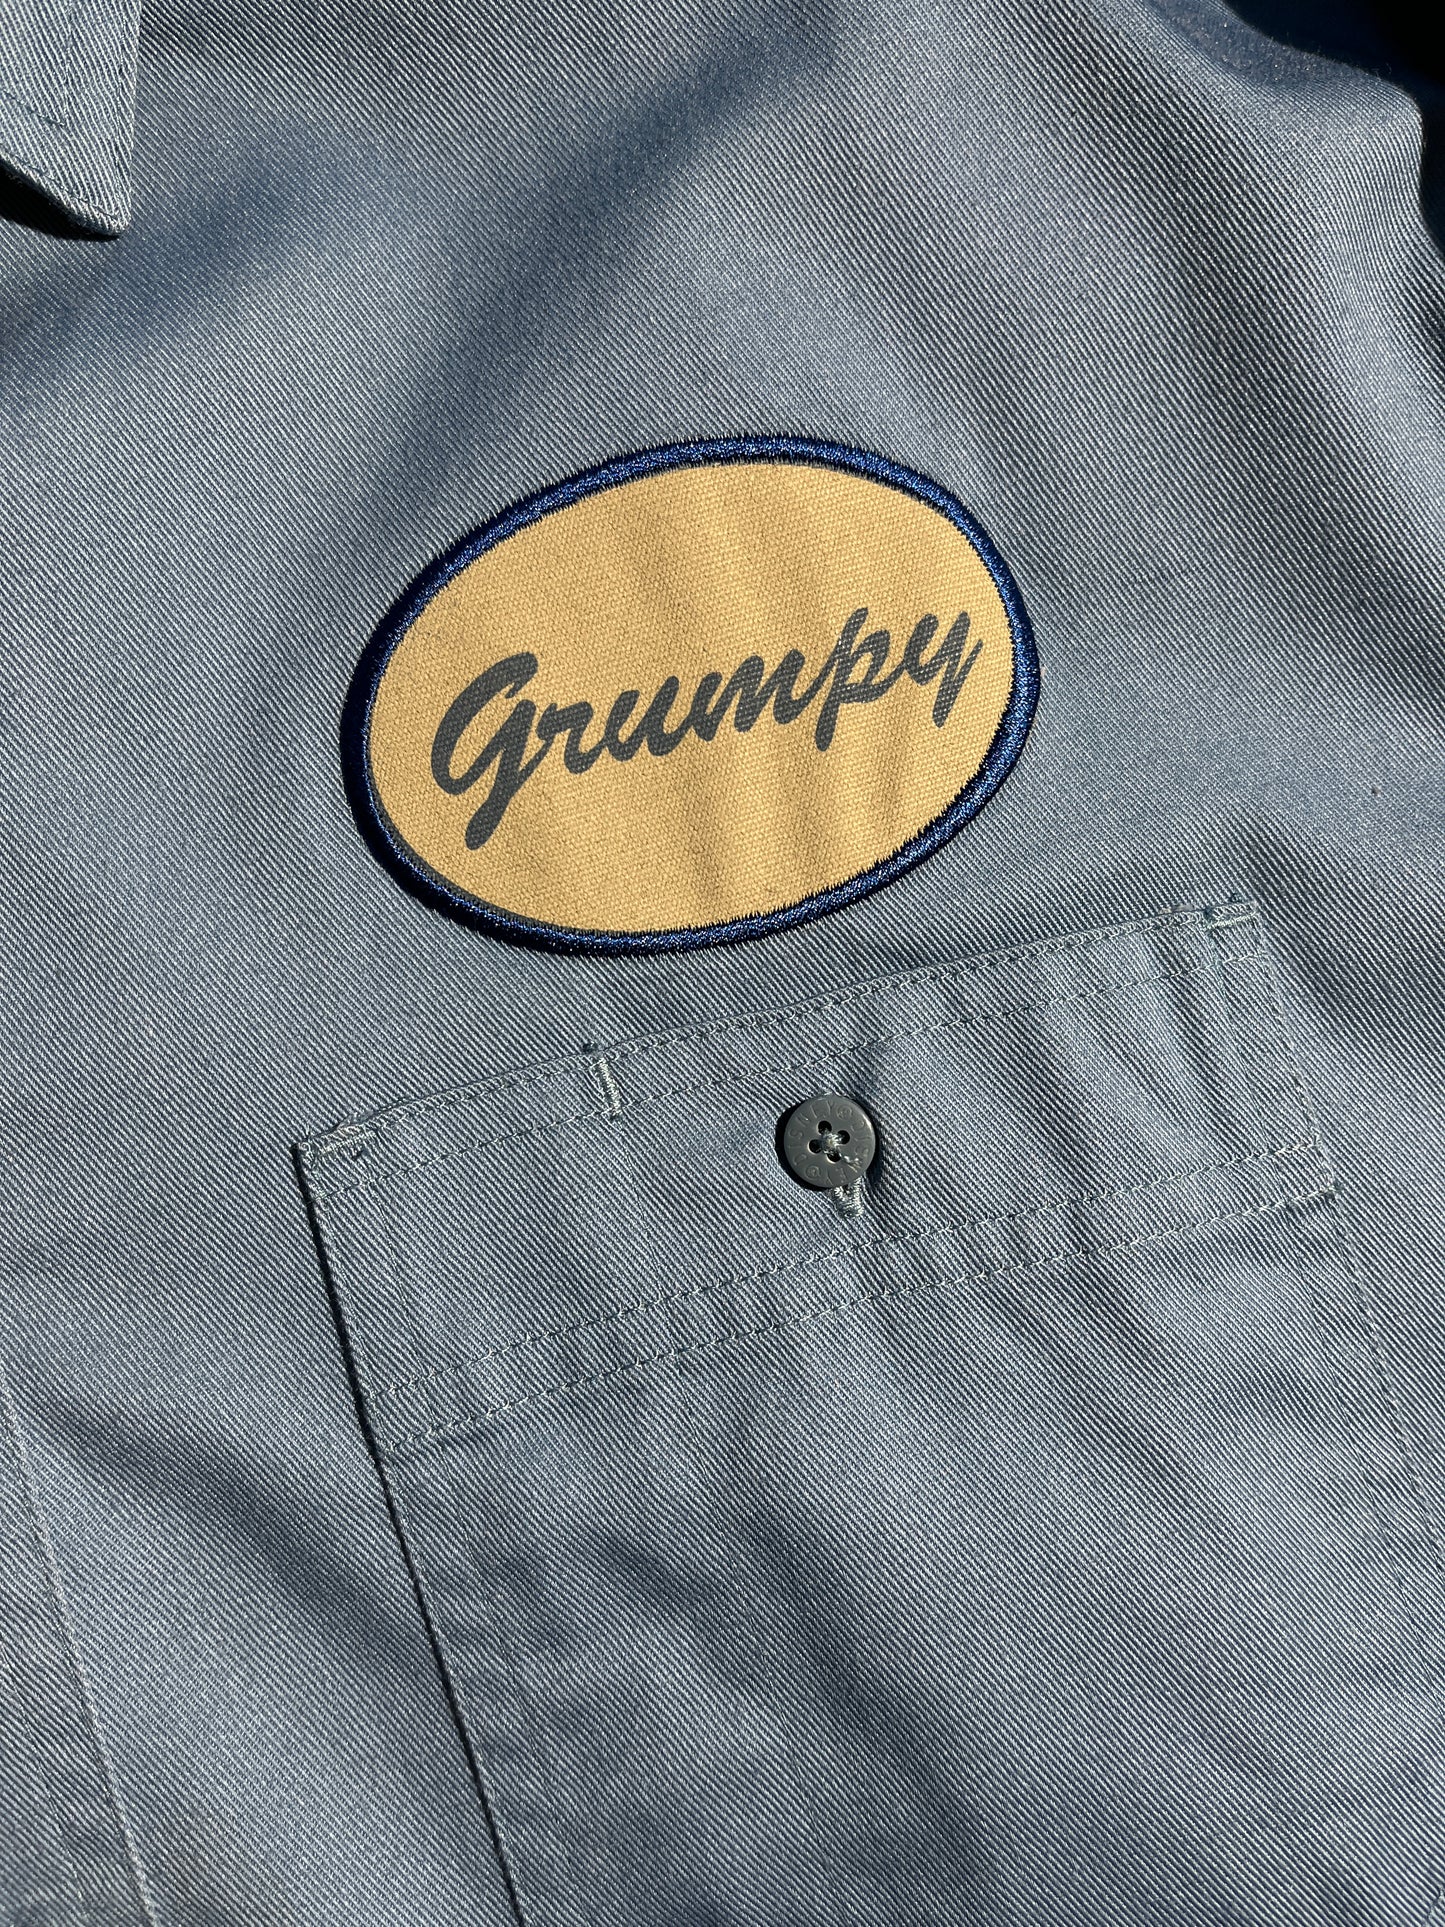 Vintage Grumpy Button Up Shirt GAS & GREASE